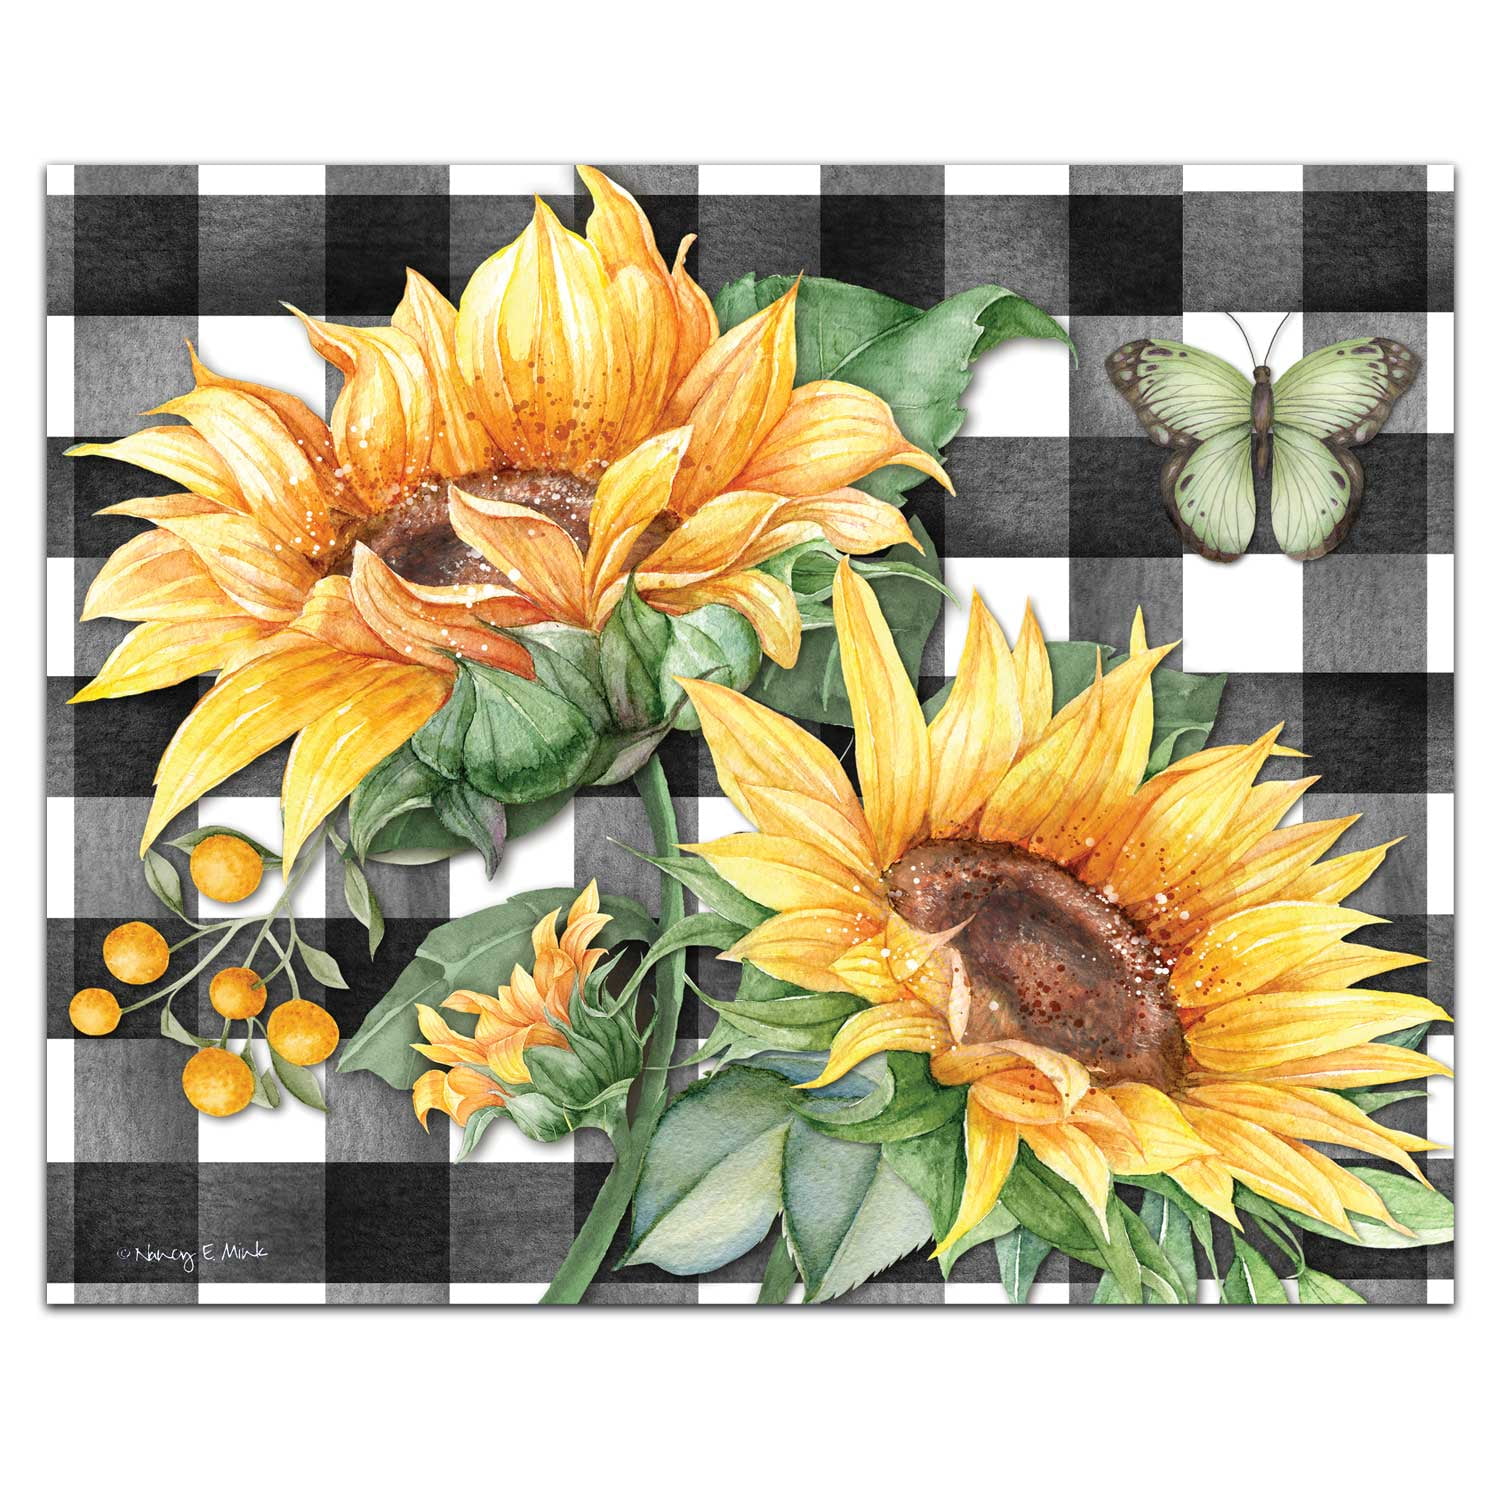 Lunarable Sunflower Cutting Board, Romantic Flowers on Old Fashioned  Letters Postcards Newspapers, Decorative Tempered Glass Cutting and Serving